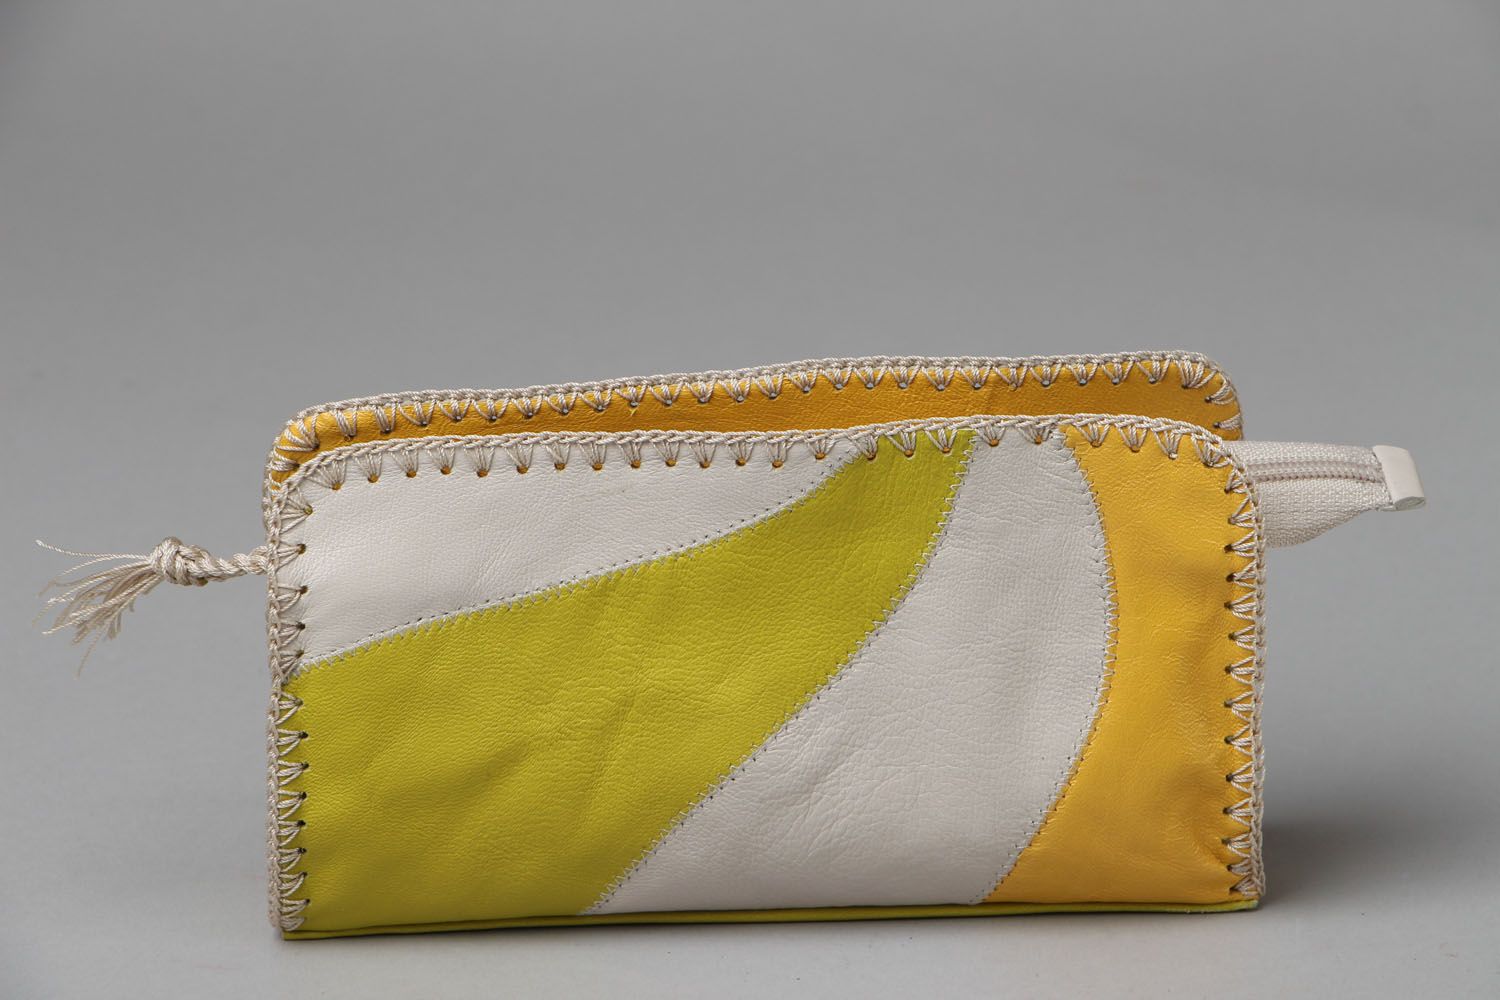 Yellow and white leather beauty bag photo 1